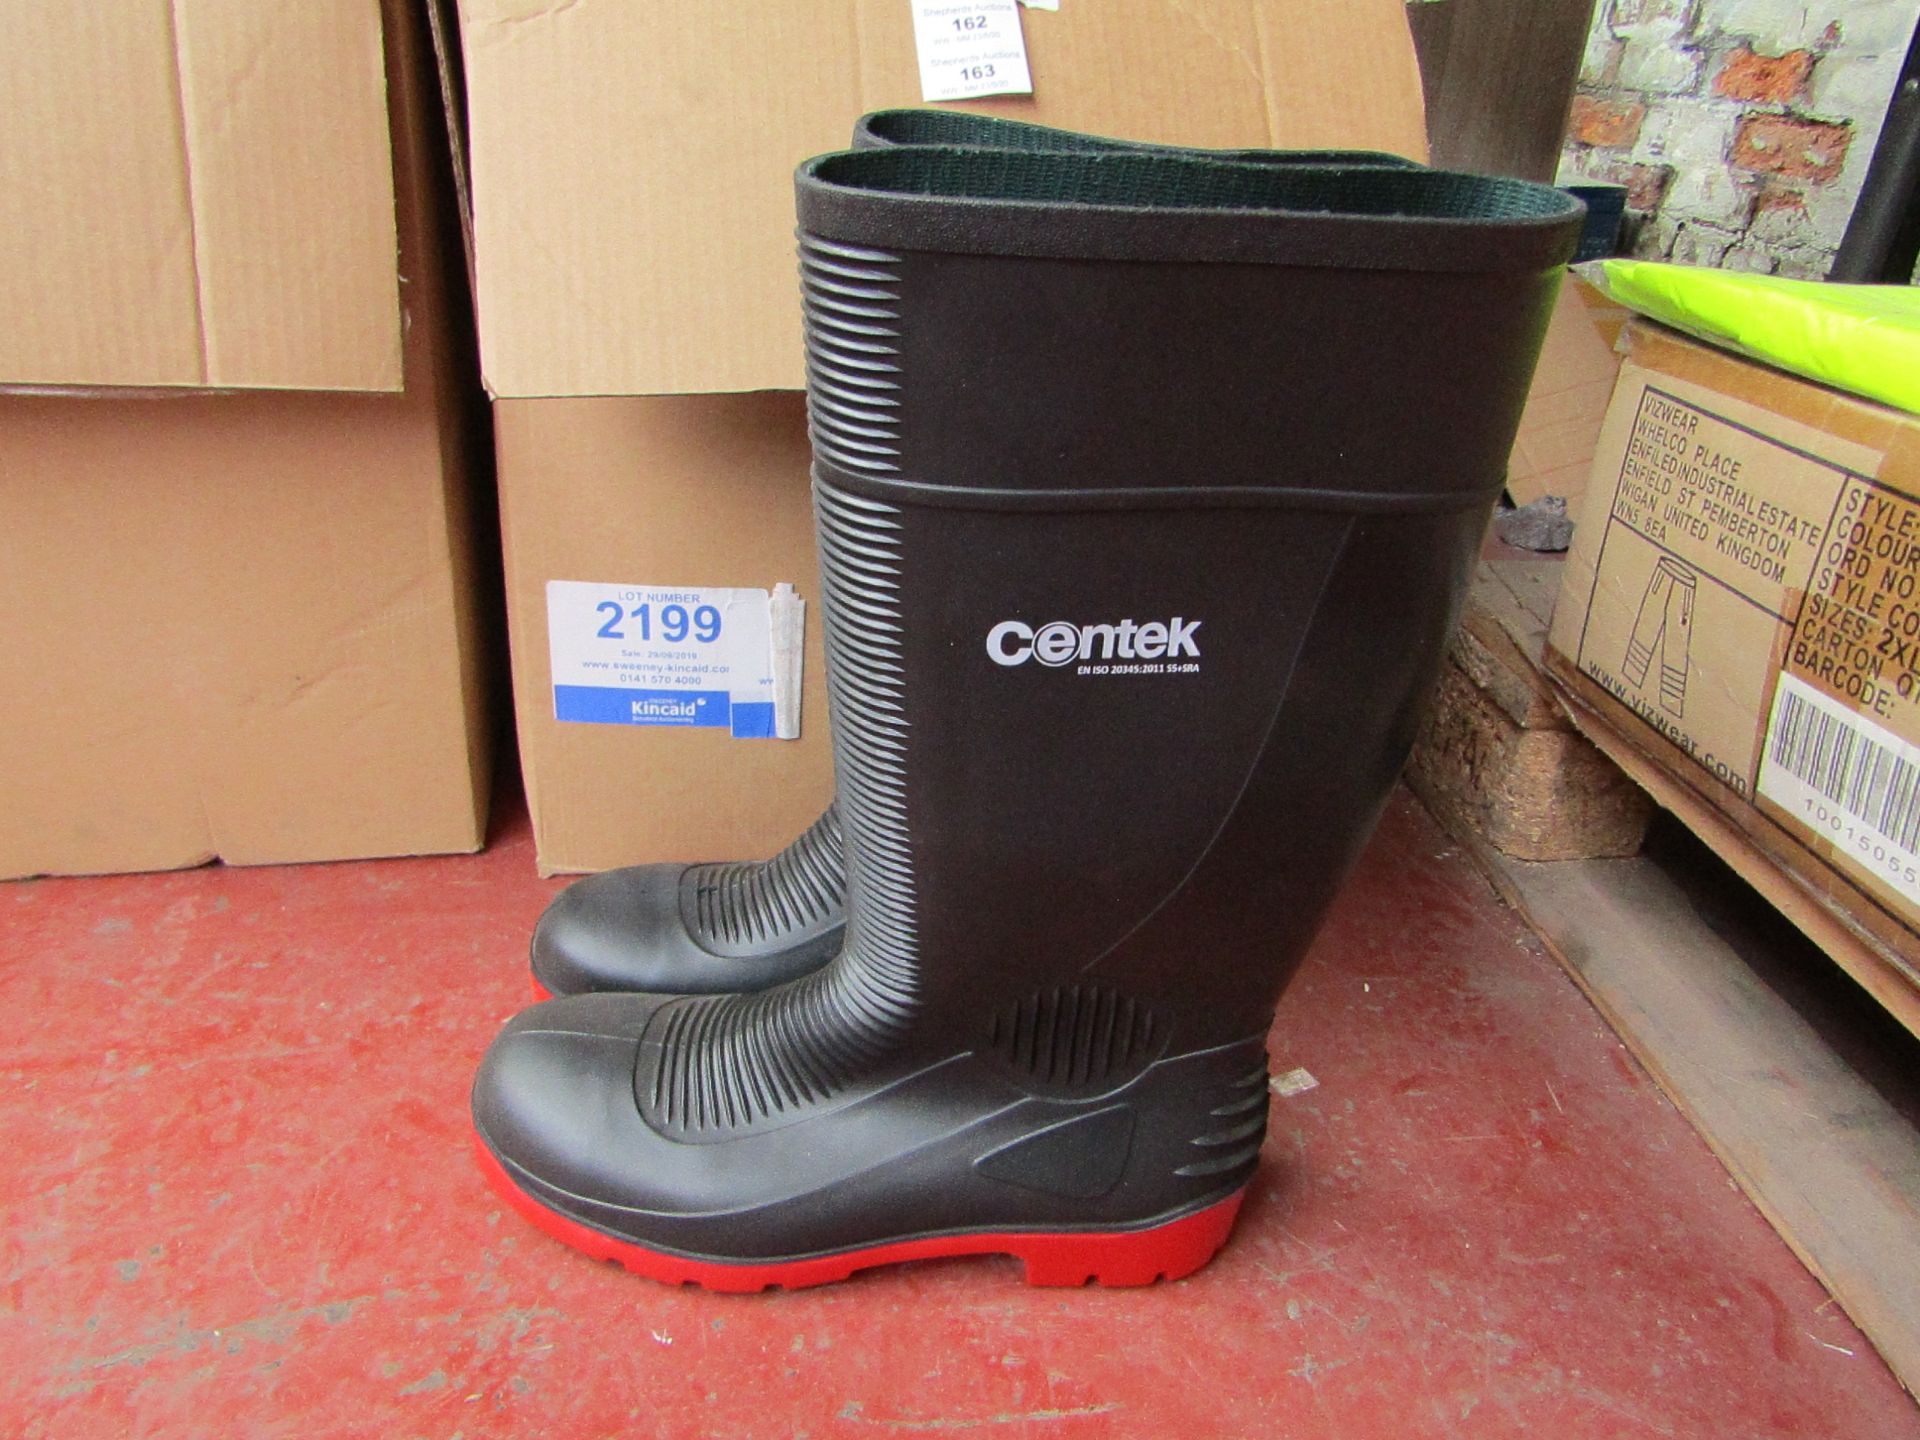 Centrek - Black & Red Steel Toe Cap Wellies - Size 10 - All New in Good Condition.